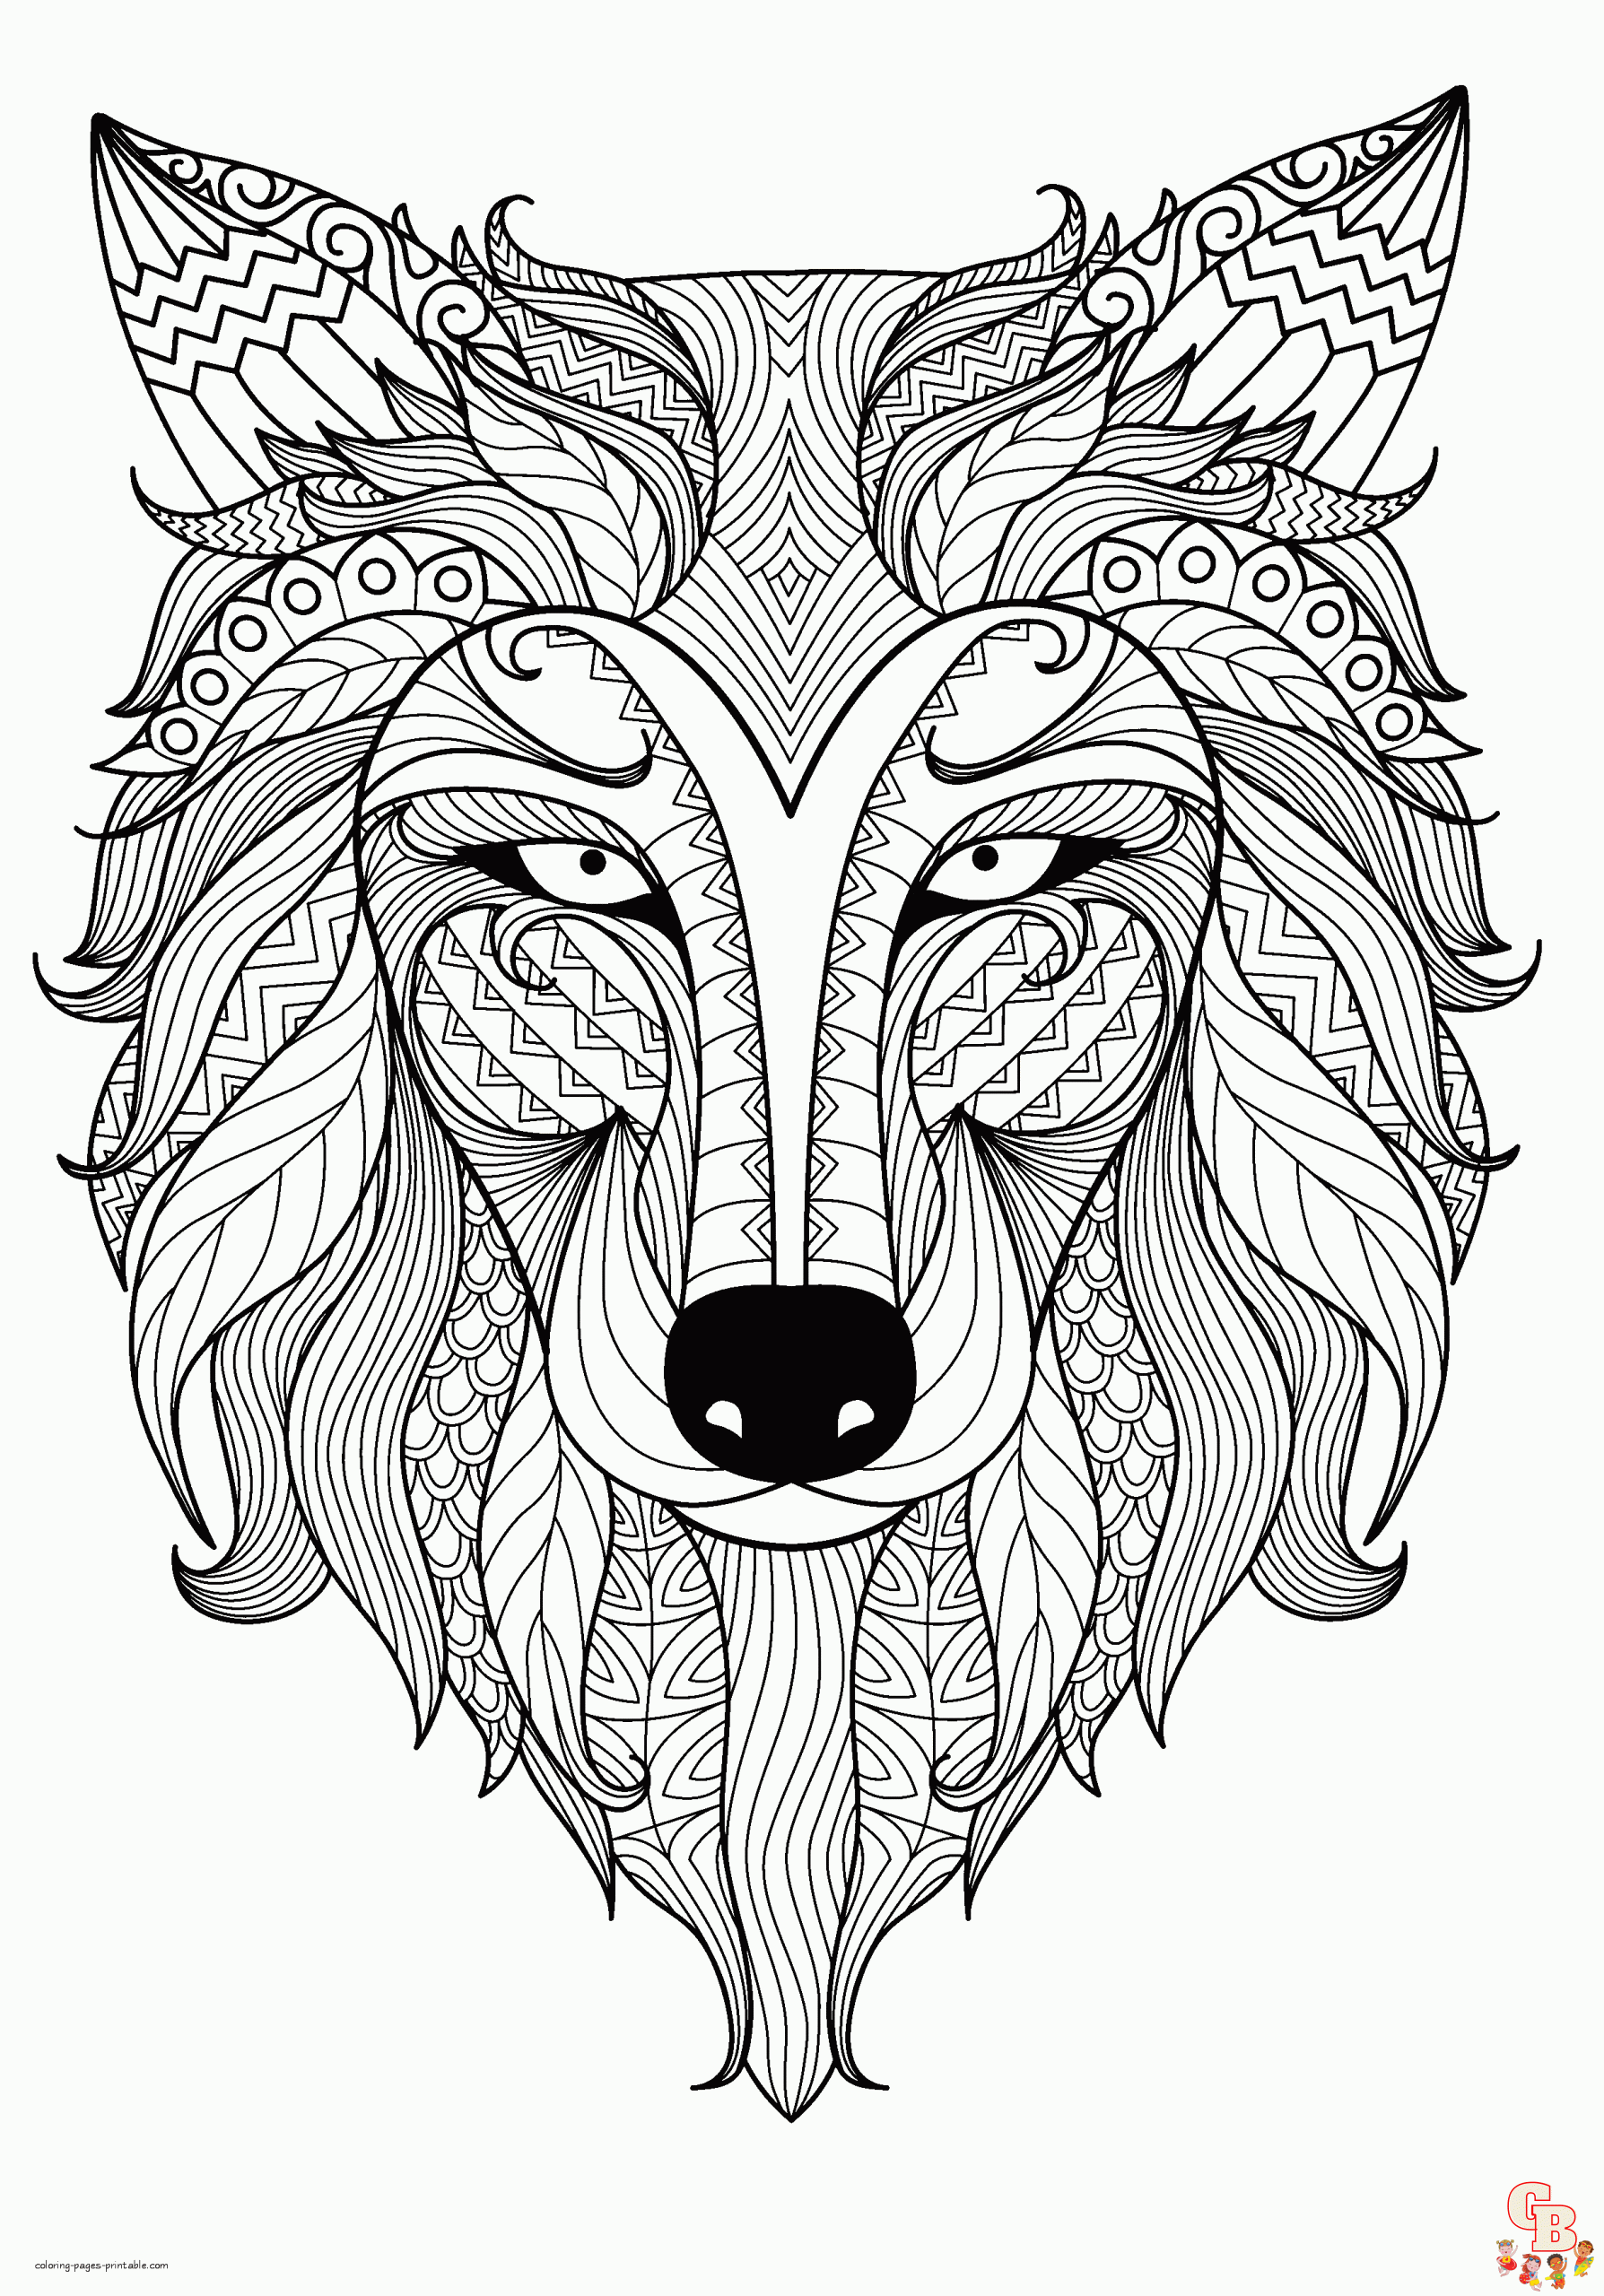 Anxiety Coloring Pages to Help You Relax